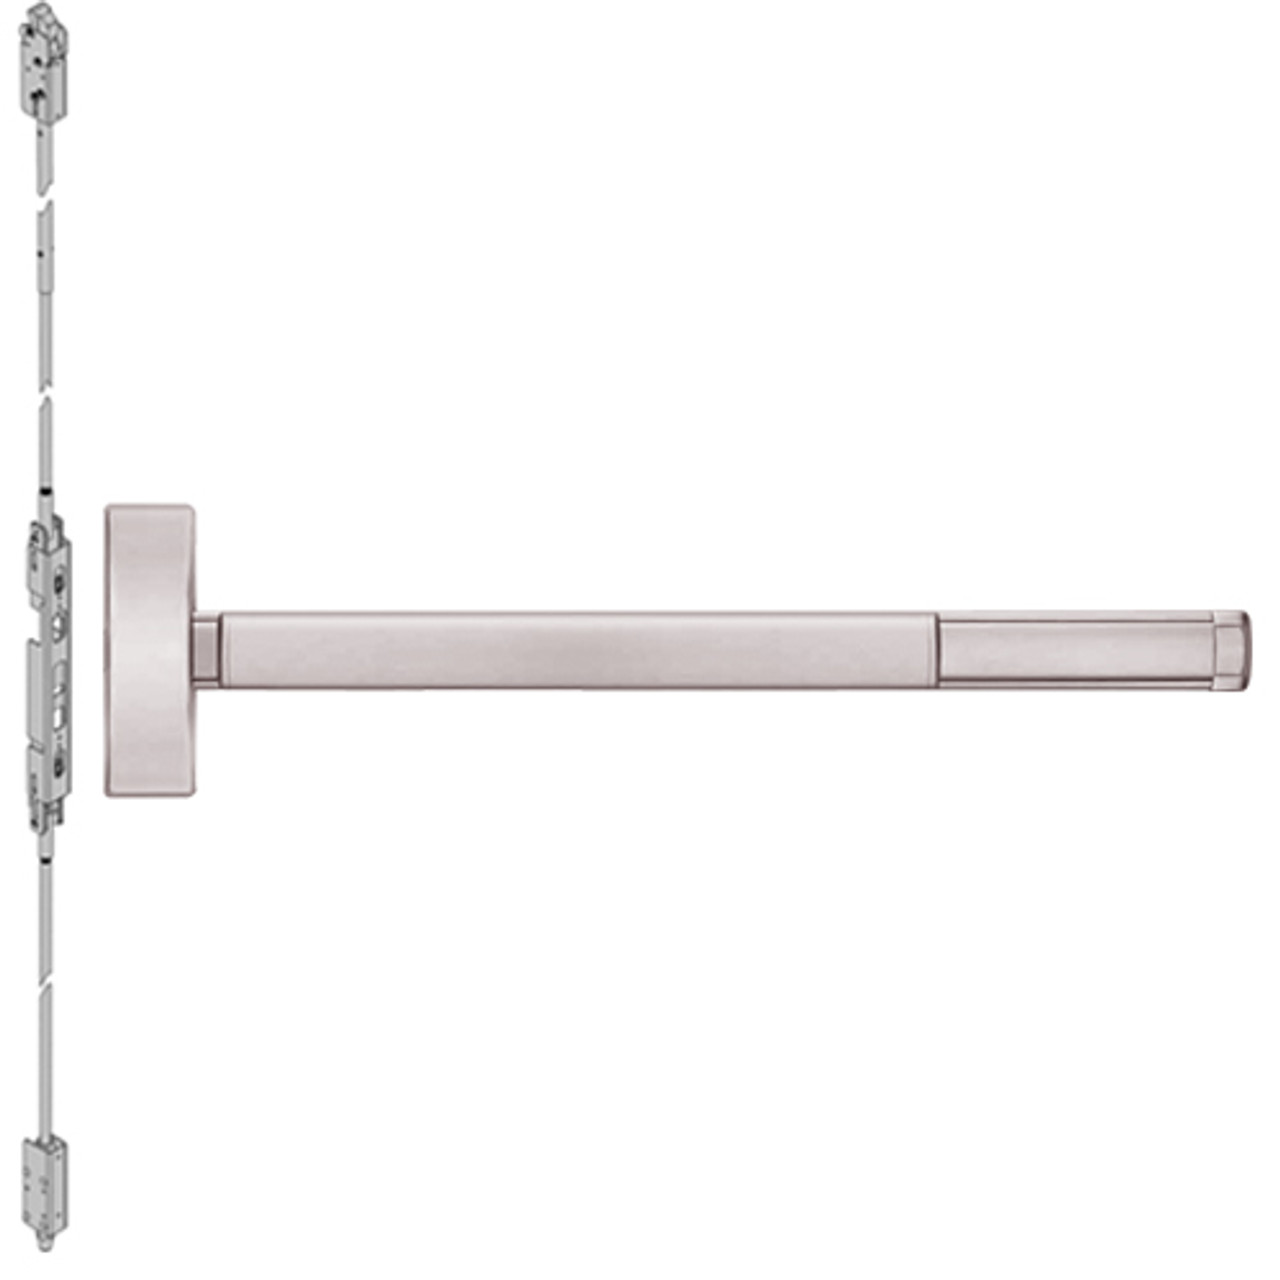 FL2815LBR-628-36 PHI 2800 Series Fire Rated Concealed Vertical Rod Exit Device Prepped for Thumbpiece Always Active in Satin Aluminum Finish